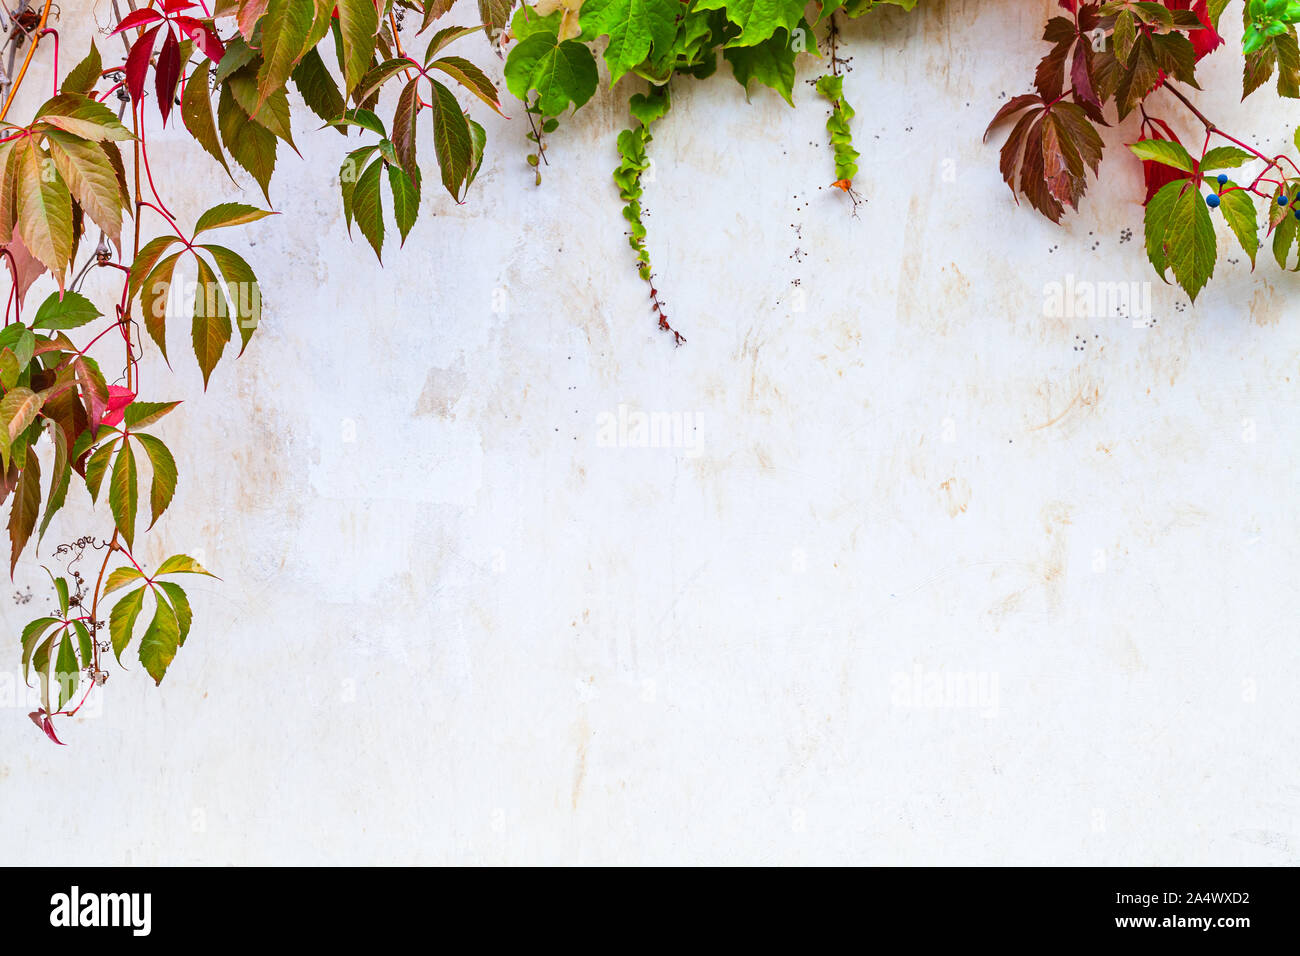 White garden wall background with climbing plant on it and copy-space blank area Stock Photo